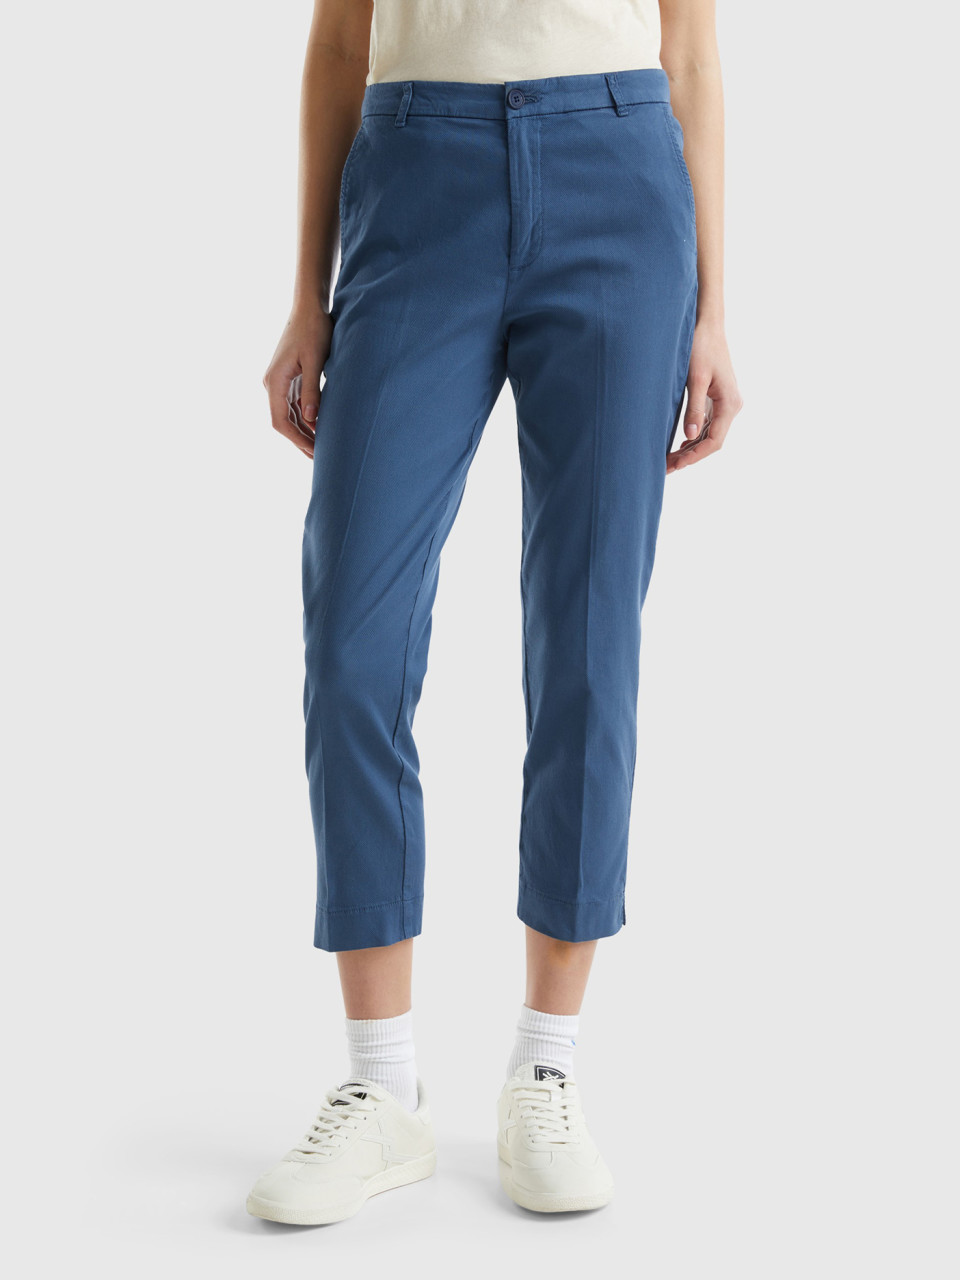 Benetton, Cropped Chinos In Stretch Cotton, Air Force Blue, Women